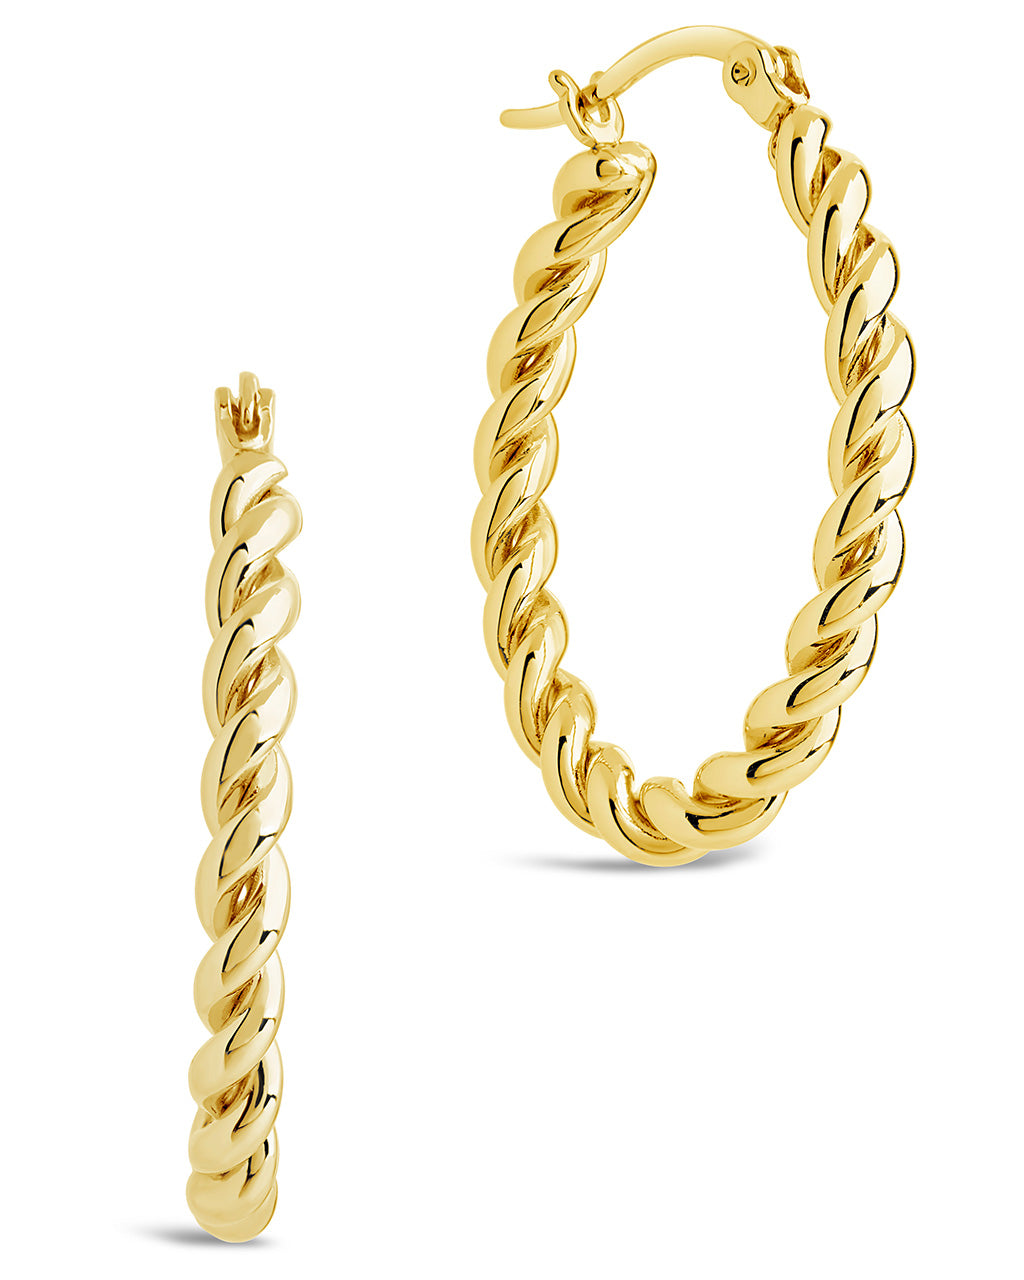 Braided Twist Statement Hoops Earring Sterling Forever Gold 